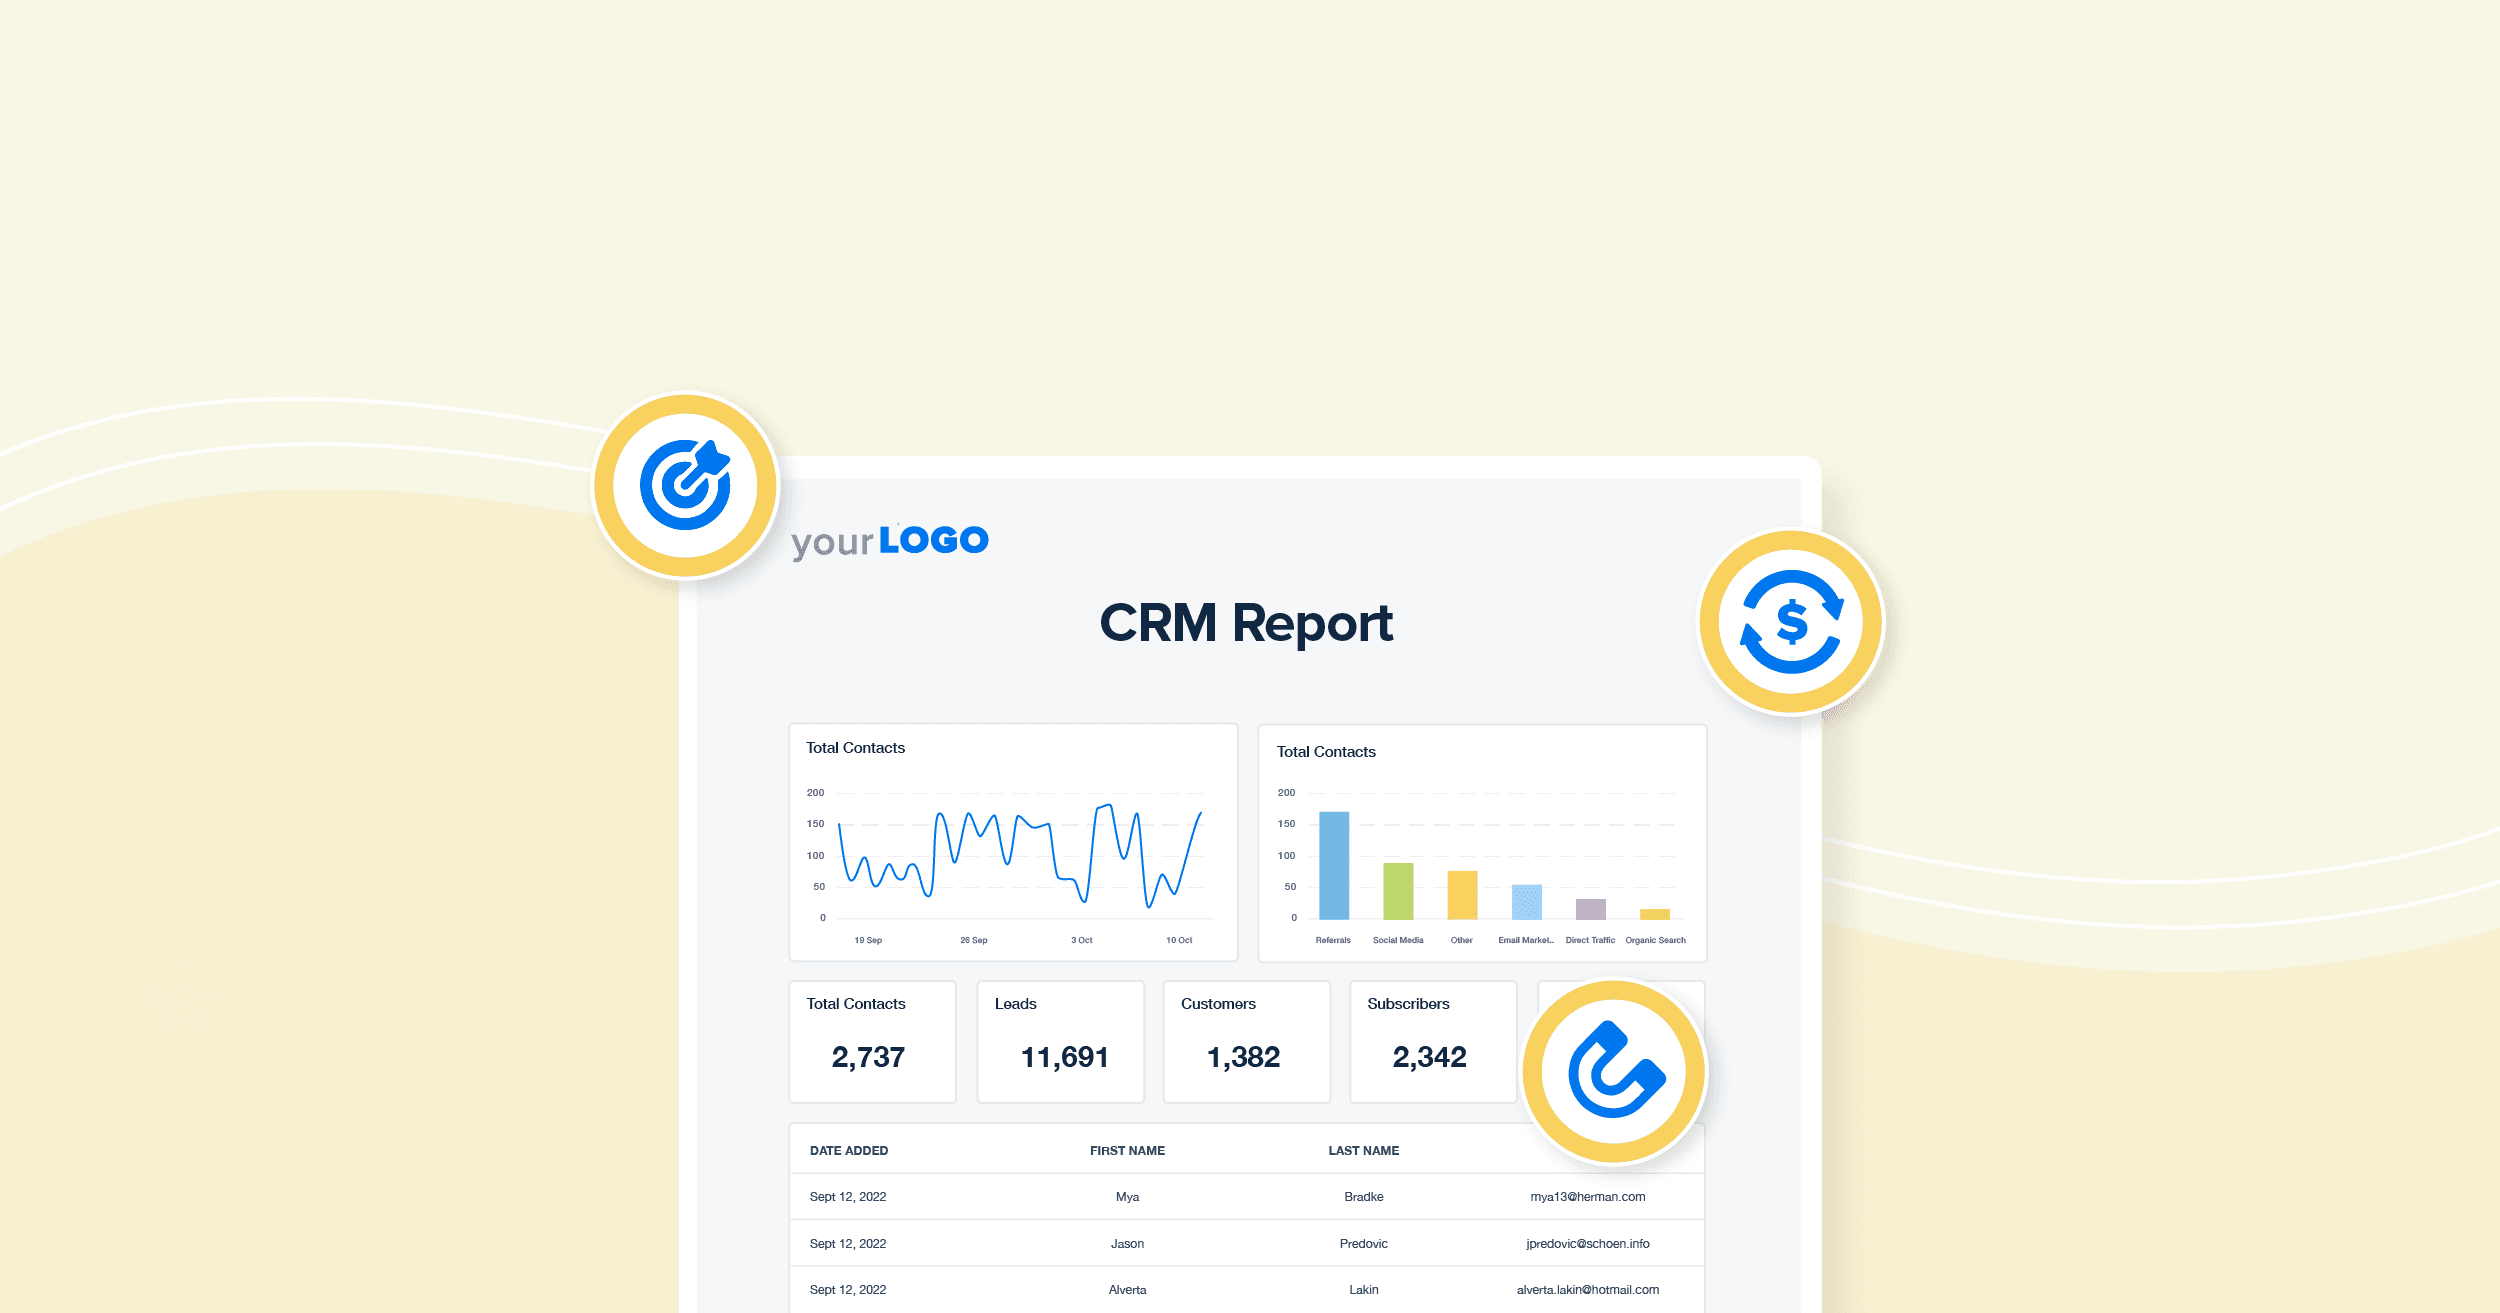 What Makes a Great CRM Report?